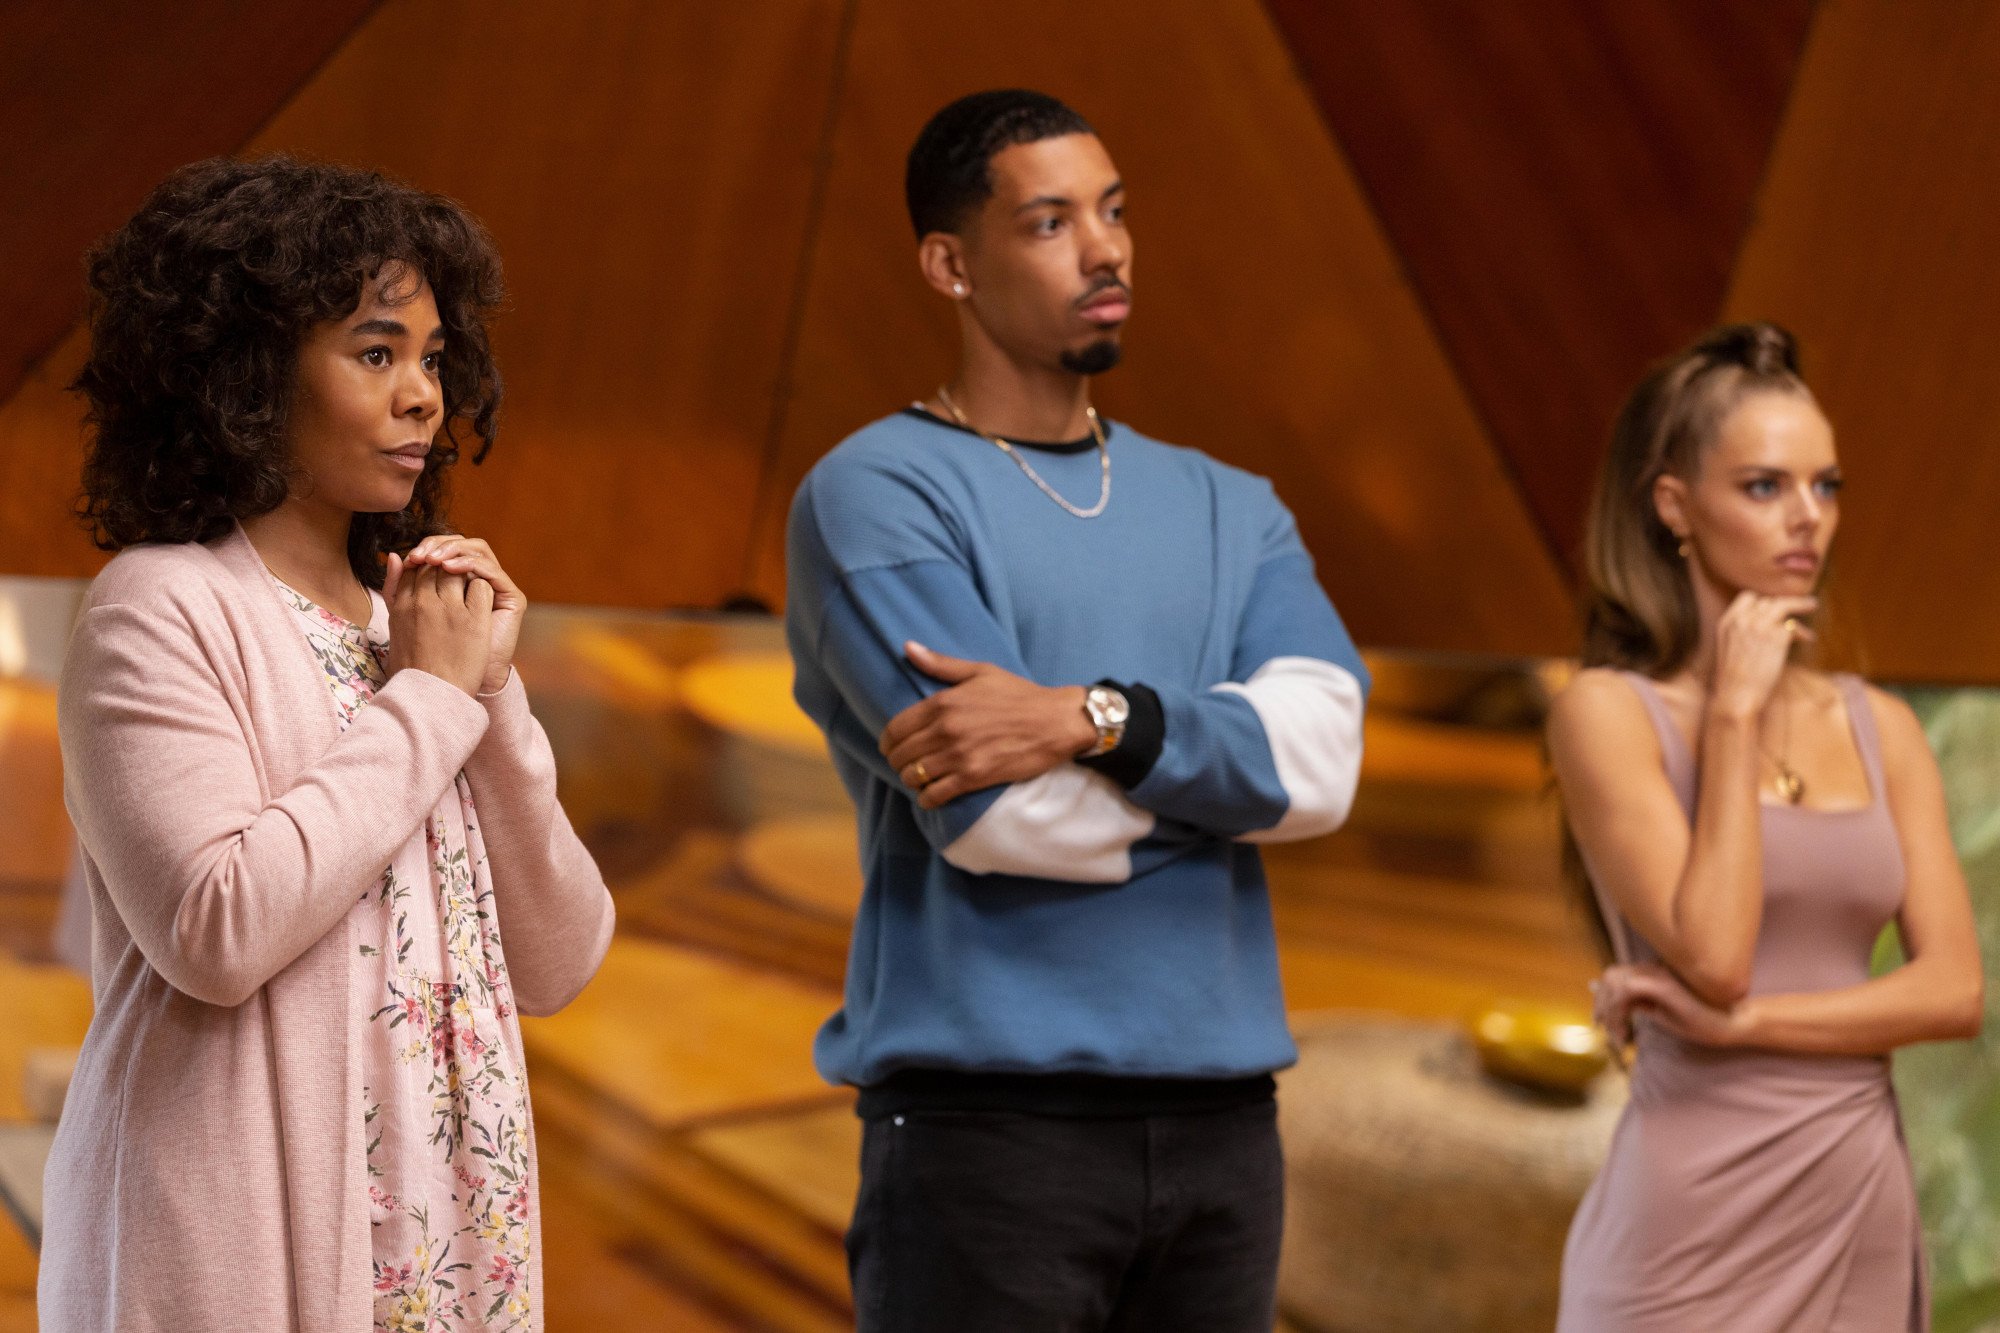 Carmel (Regina Hall), Ben (Melvin Gregg), and Jessica (Samara Weaving) from the cast of Hulu's 'Nine Perfect Strangers.' They're standing next to one another and looking confused at someone off-screen.